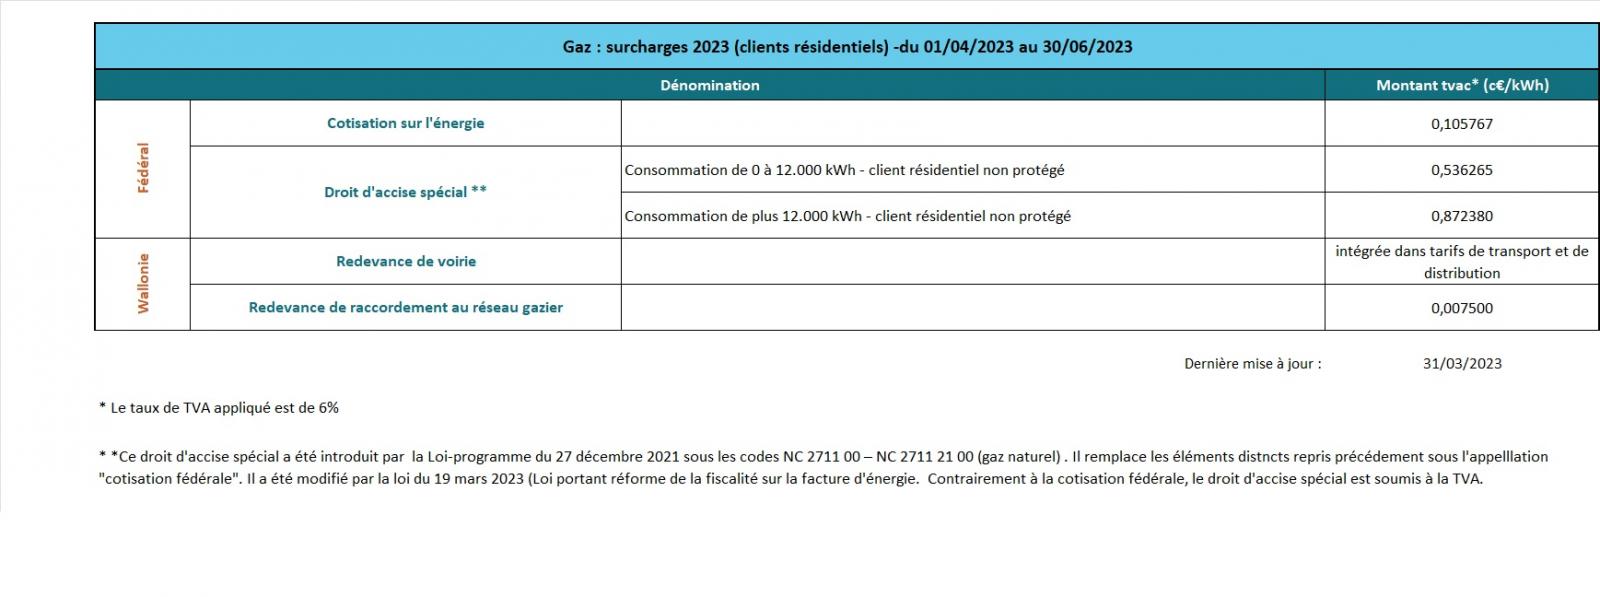 taxes surcharges gaz avril 2023